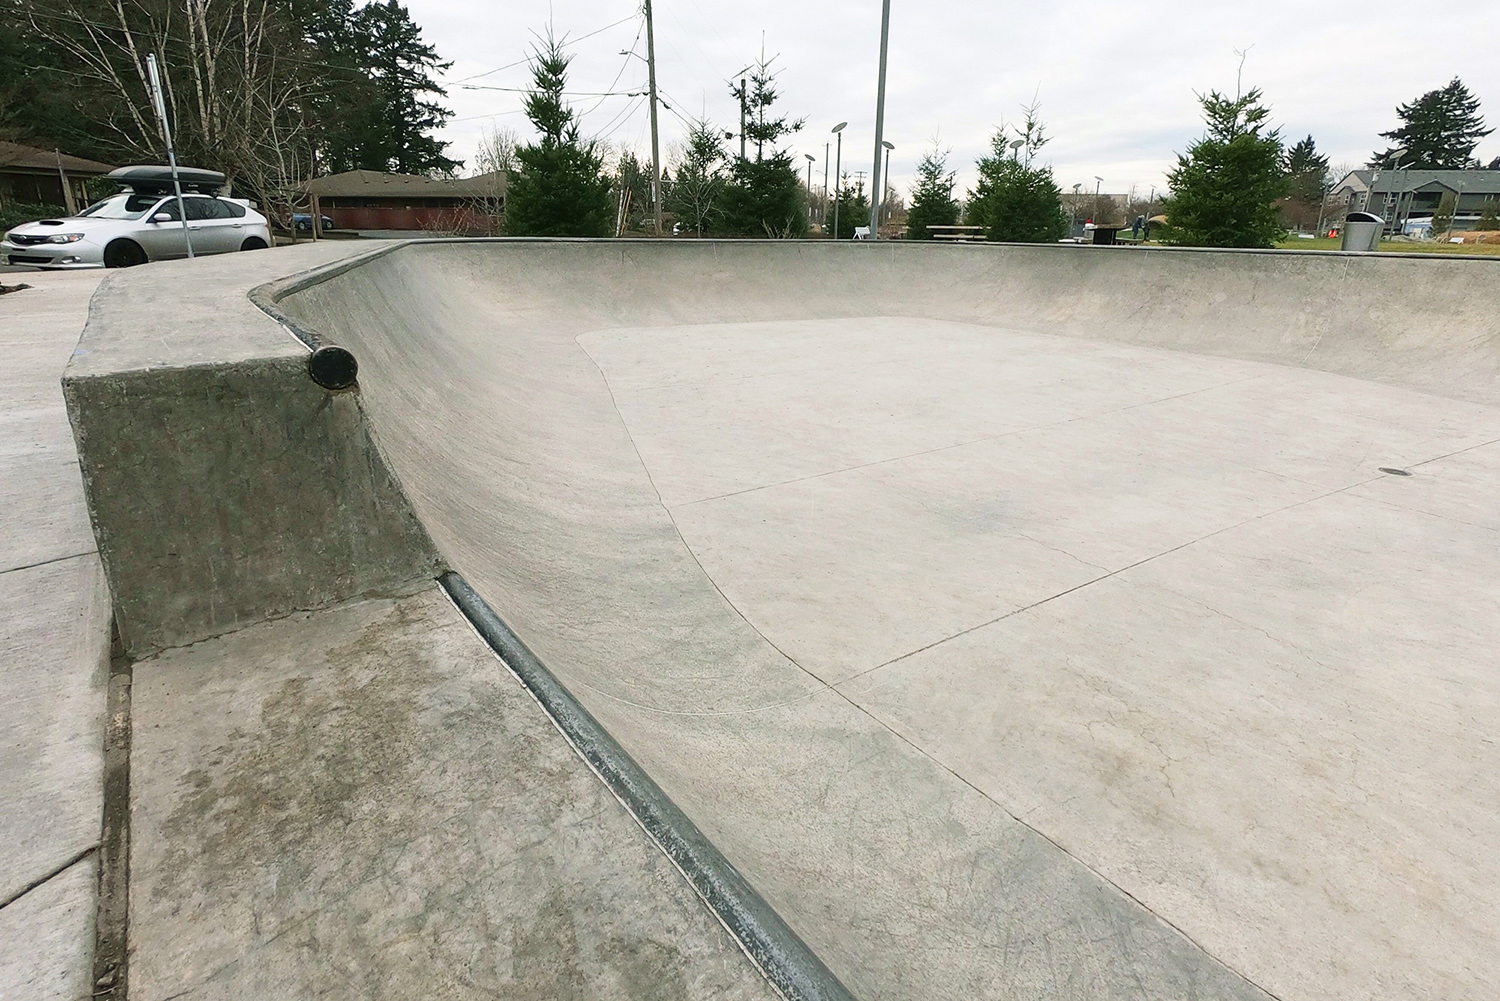  An extension section of the bowl at the Gateway Skate Spot helps to push the progression of tricks. 